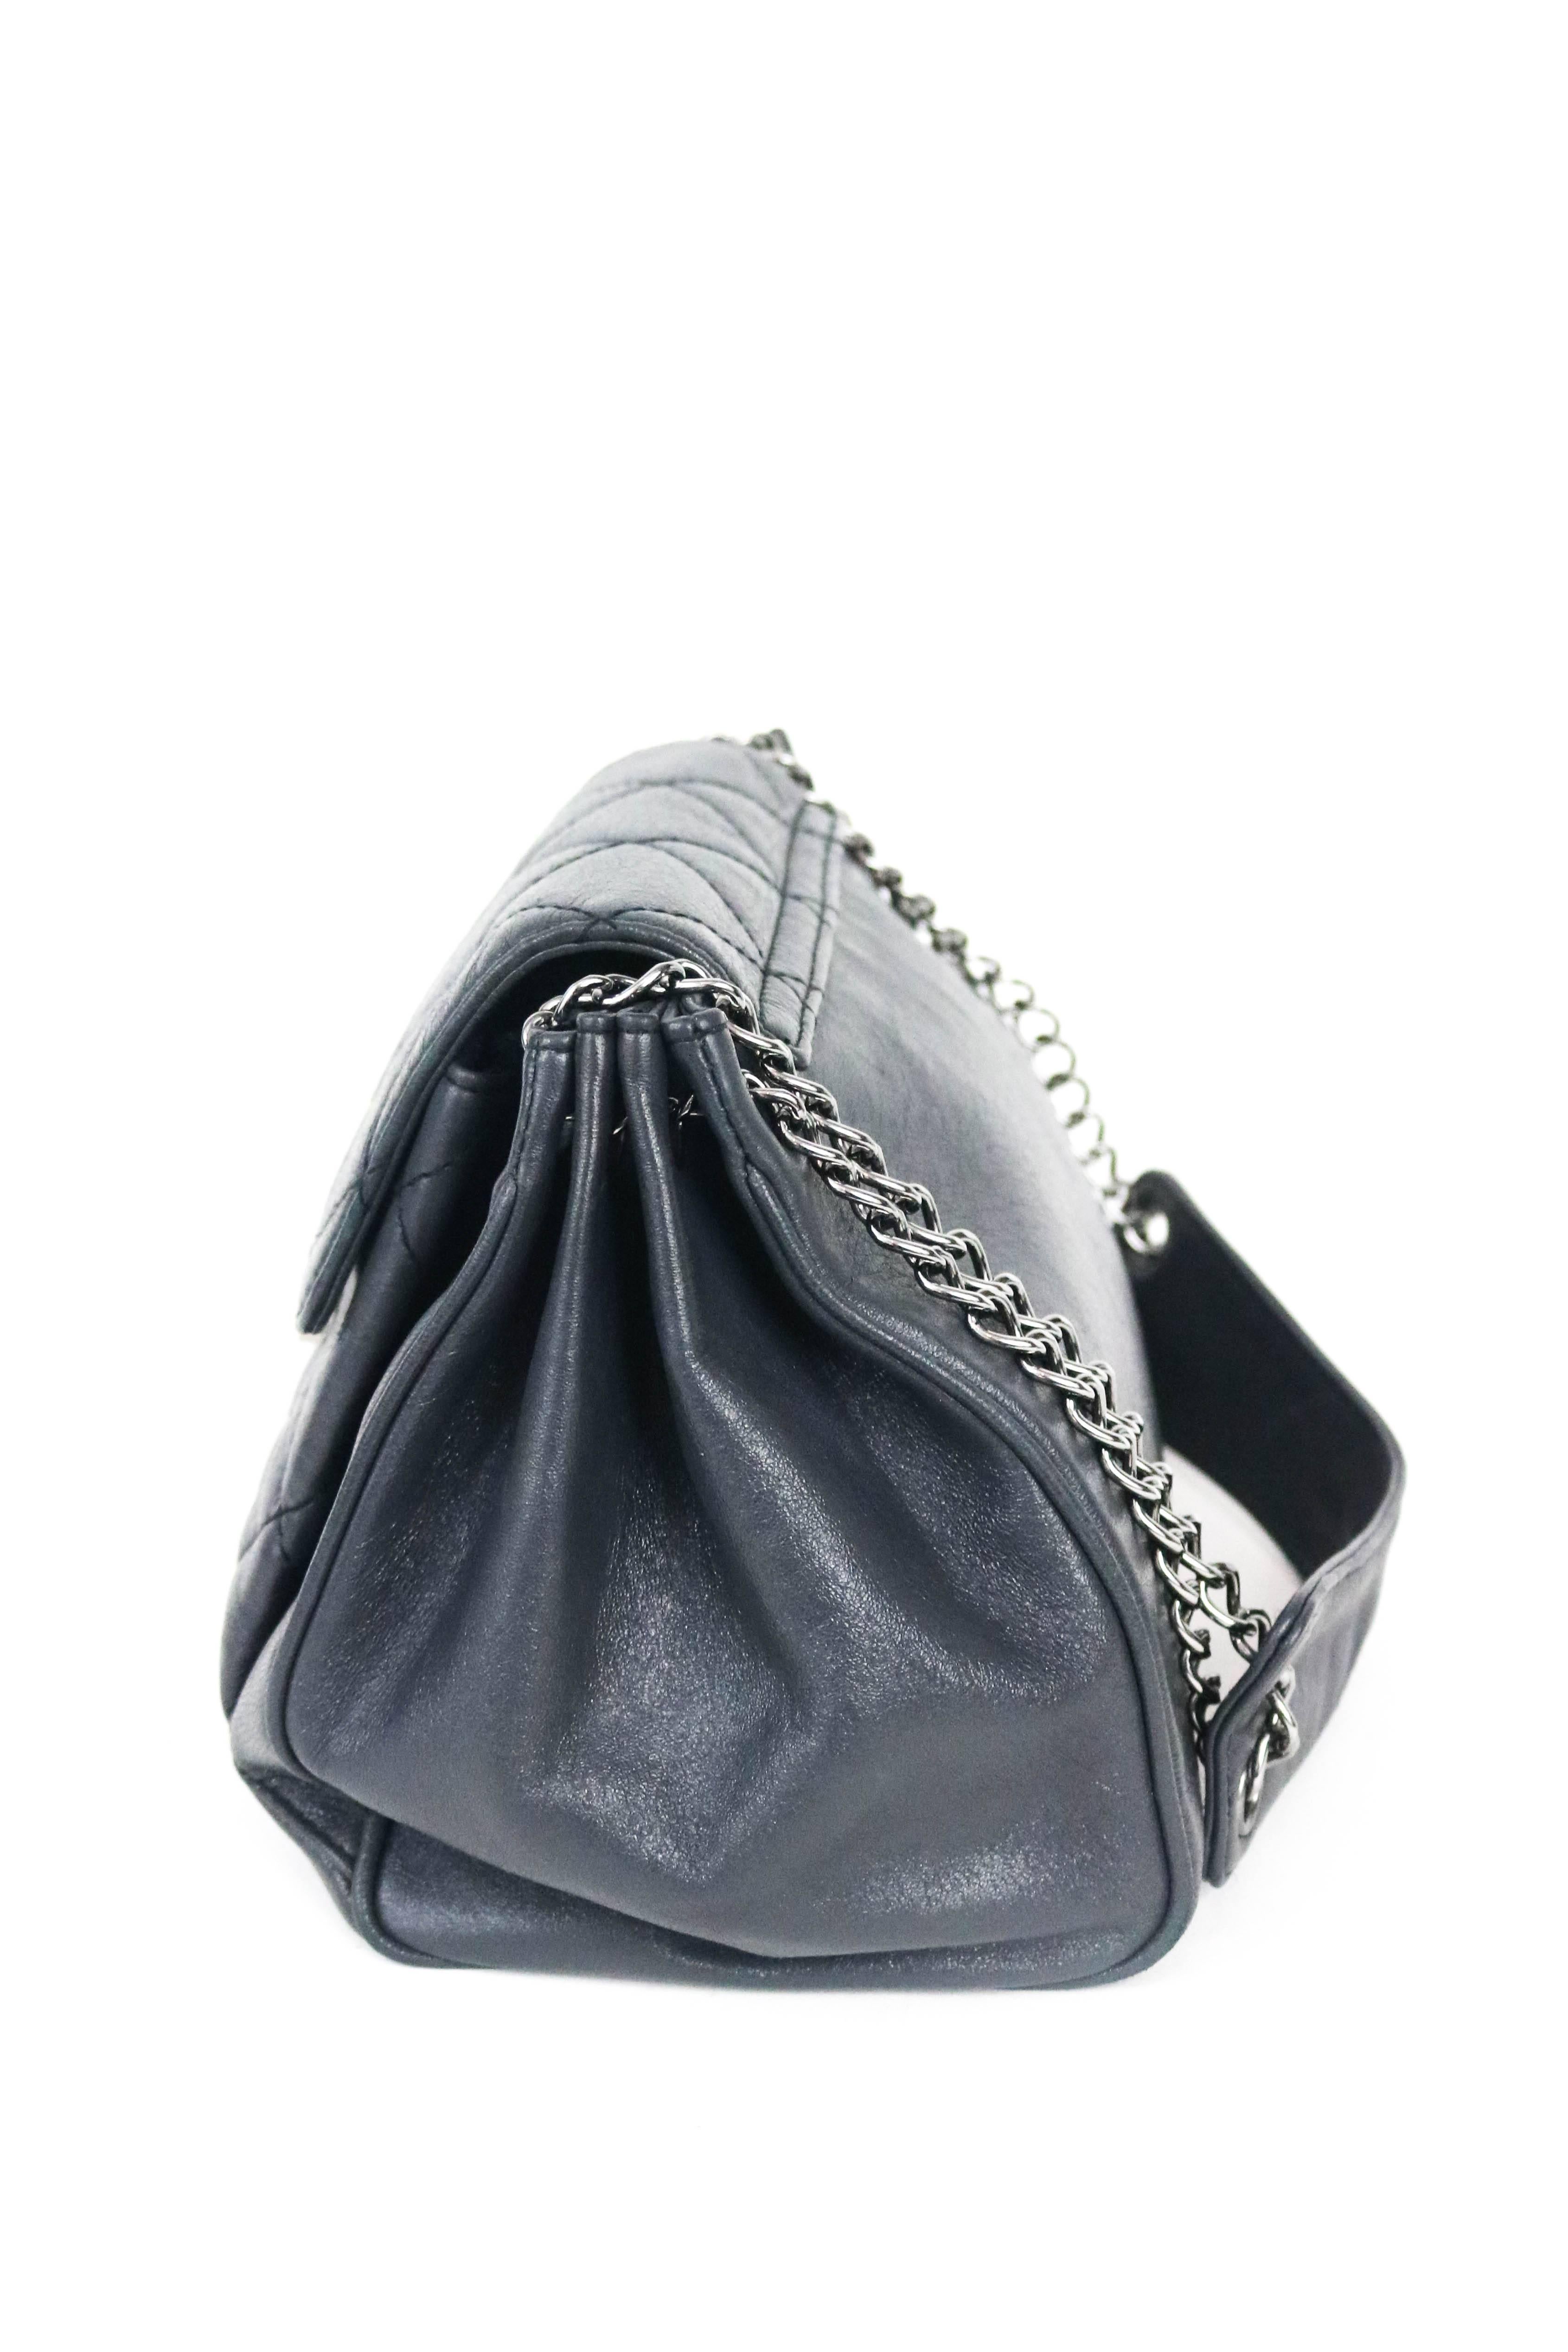 Gray Chanel Pewter Accordion Flap Bag 